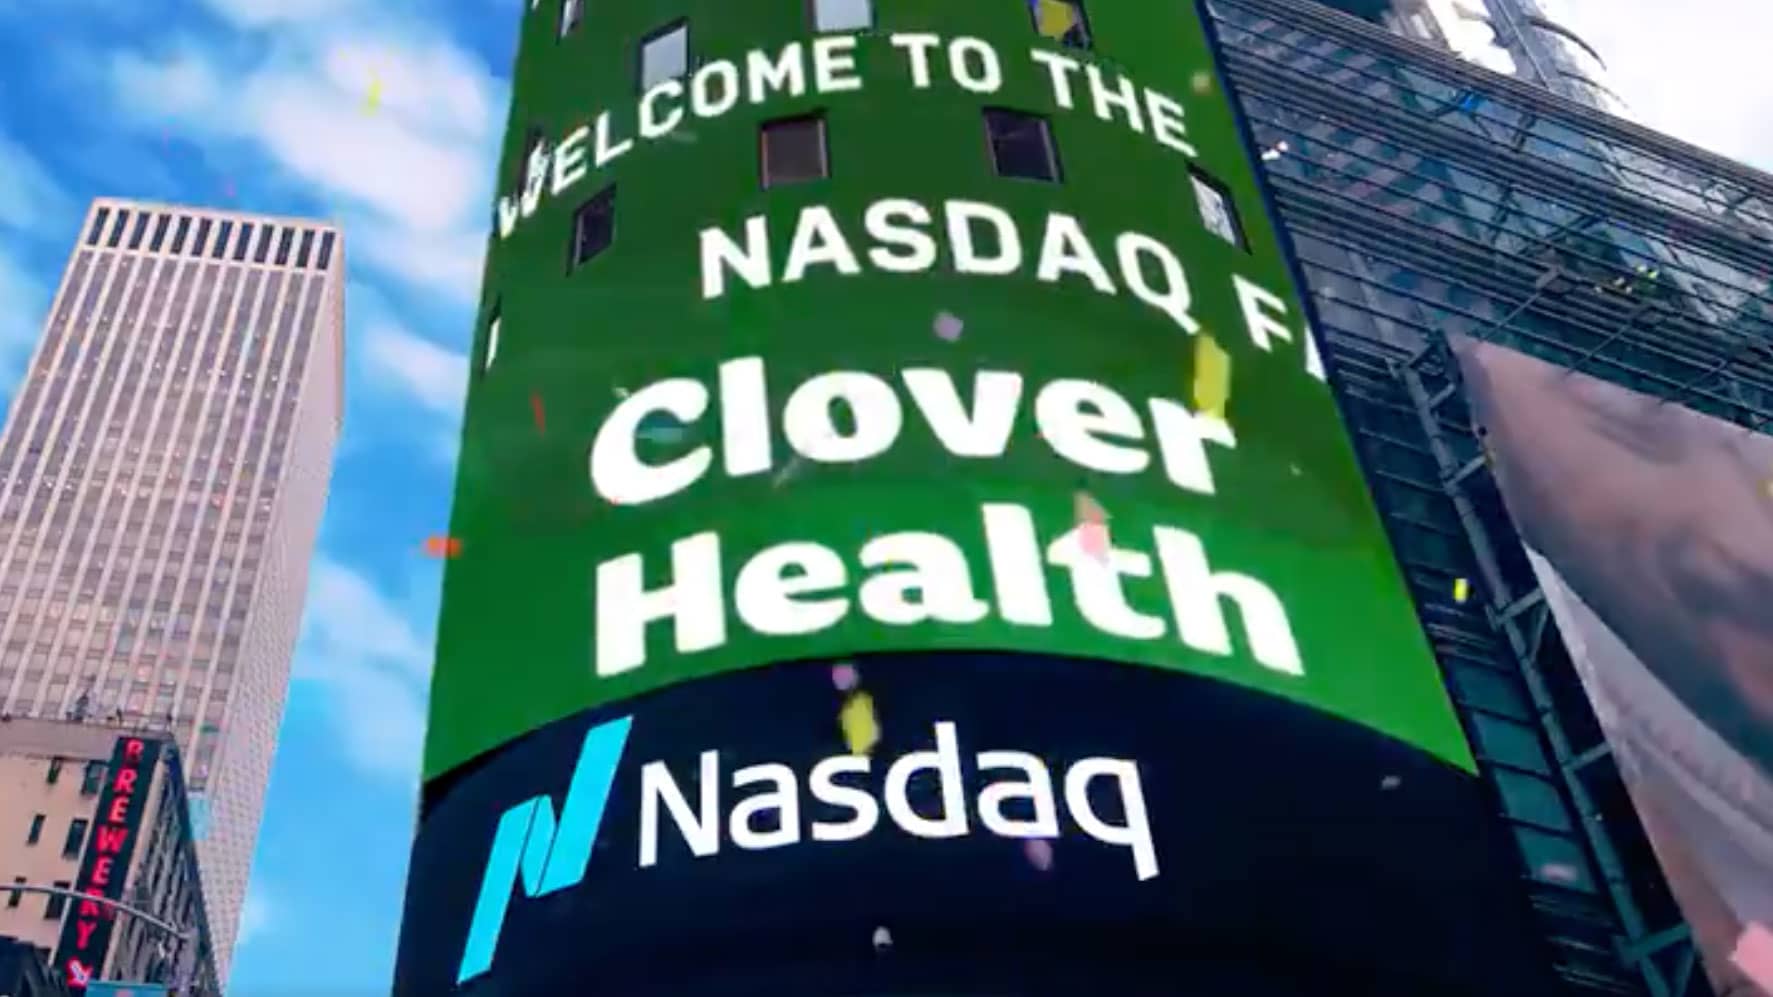 Clover Health jumps 14% in premarket trading as frenzy continues. Shares are up 150% this week